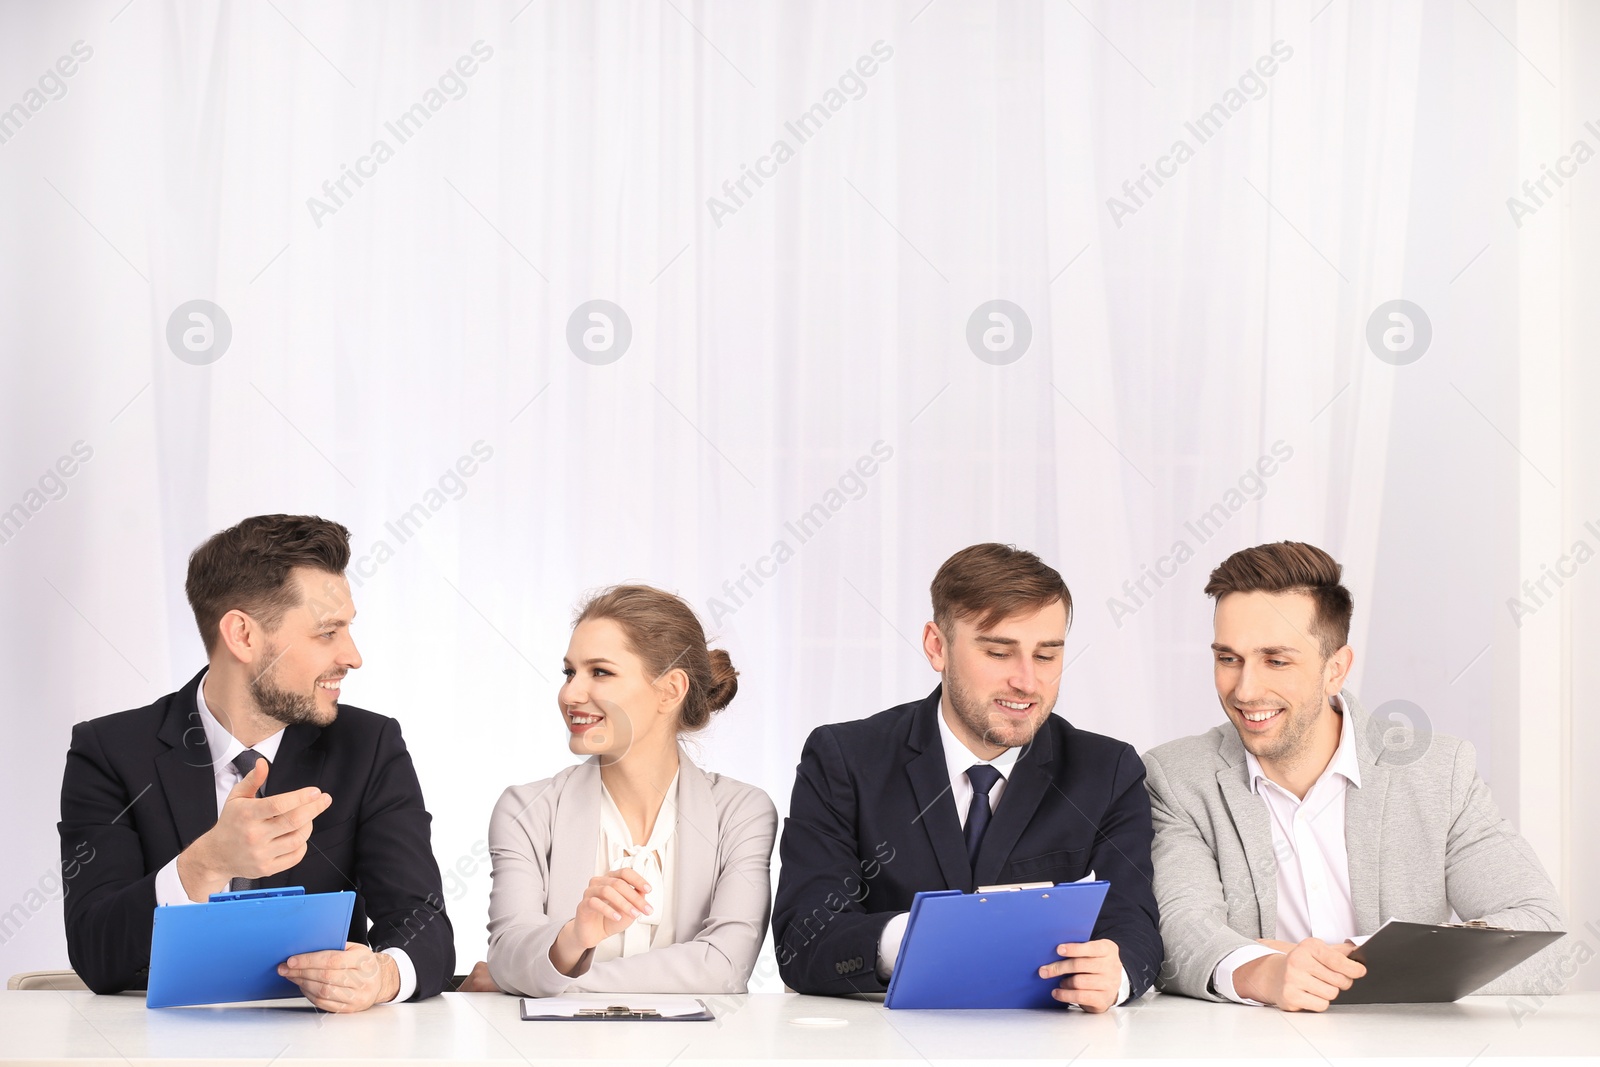 Photo of Human resources commission ready to conduct job interview, indoors